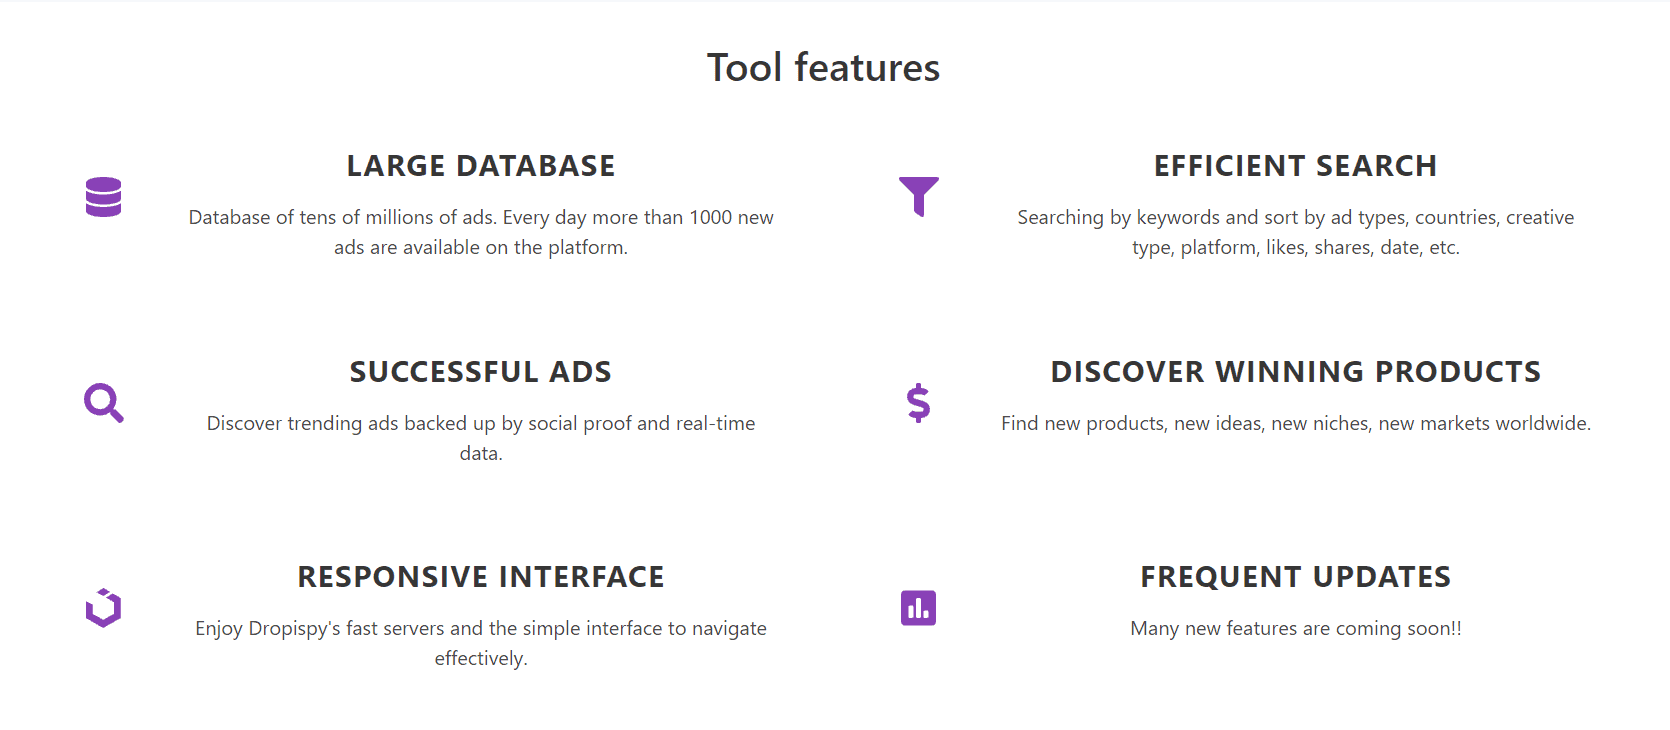 Tool features